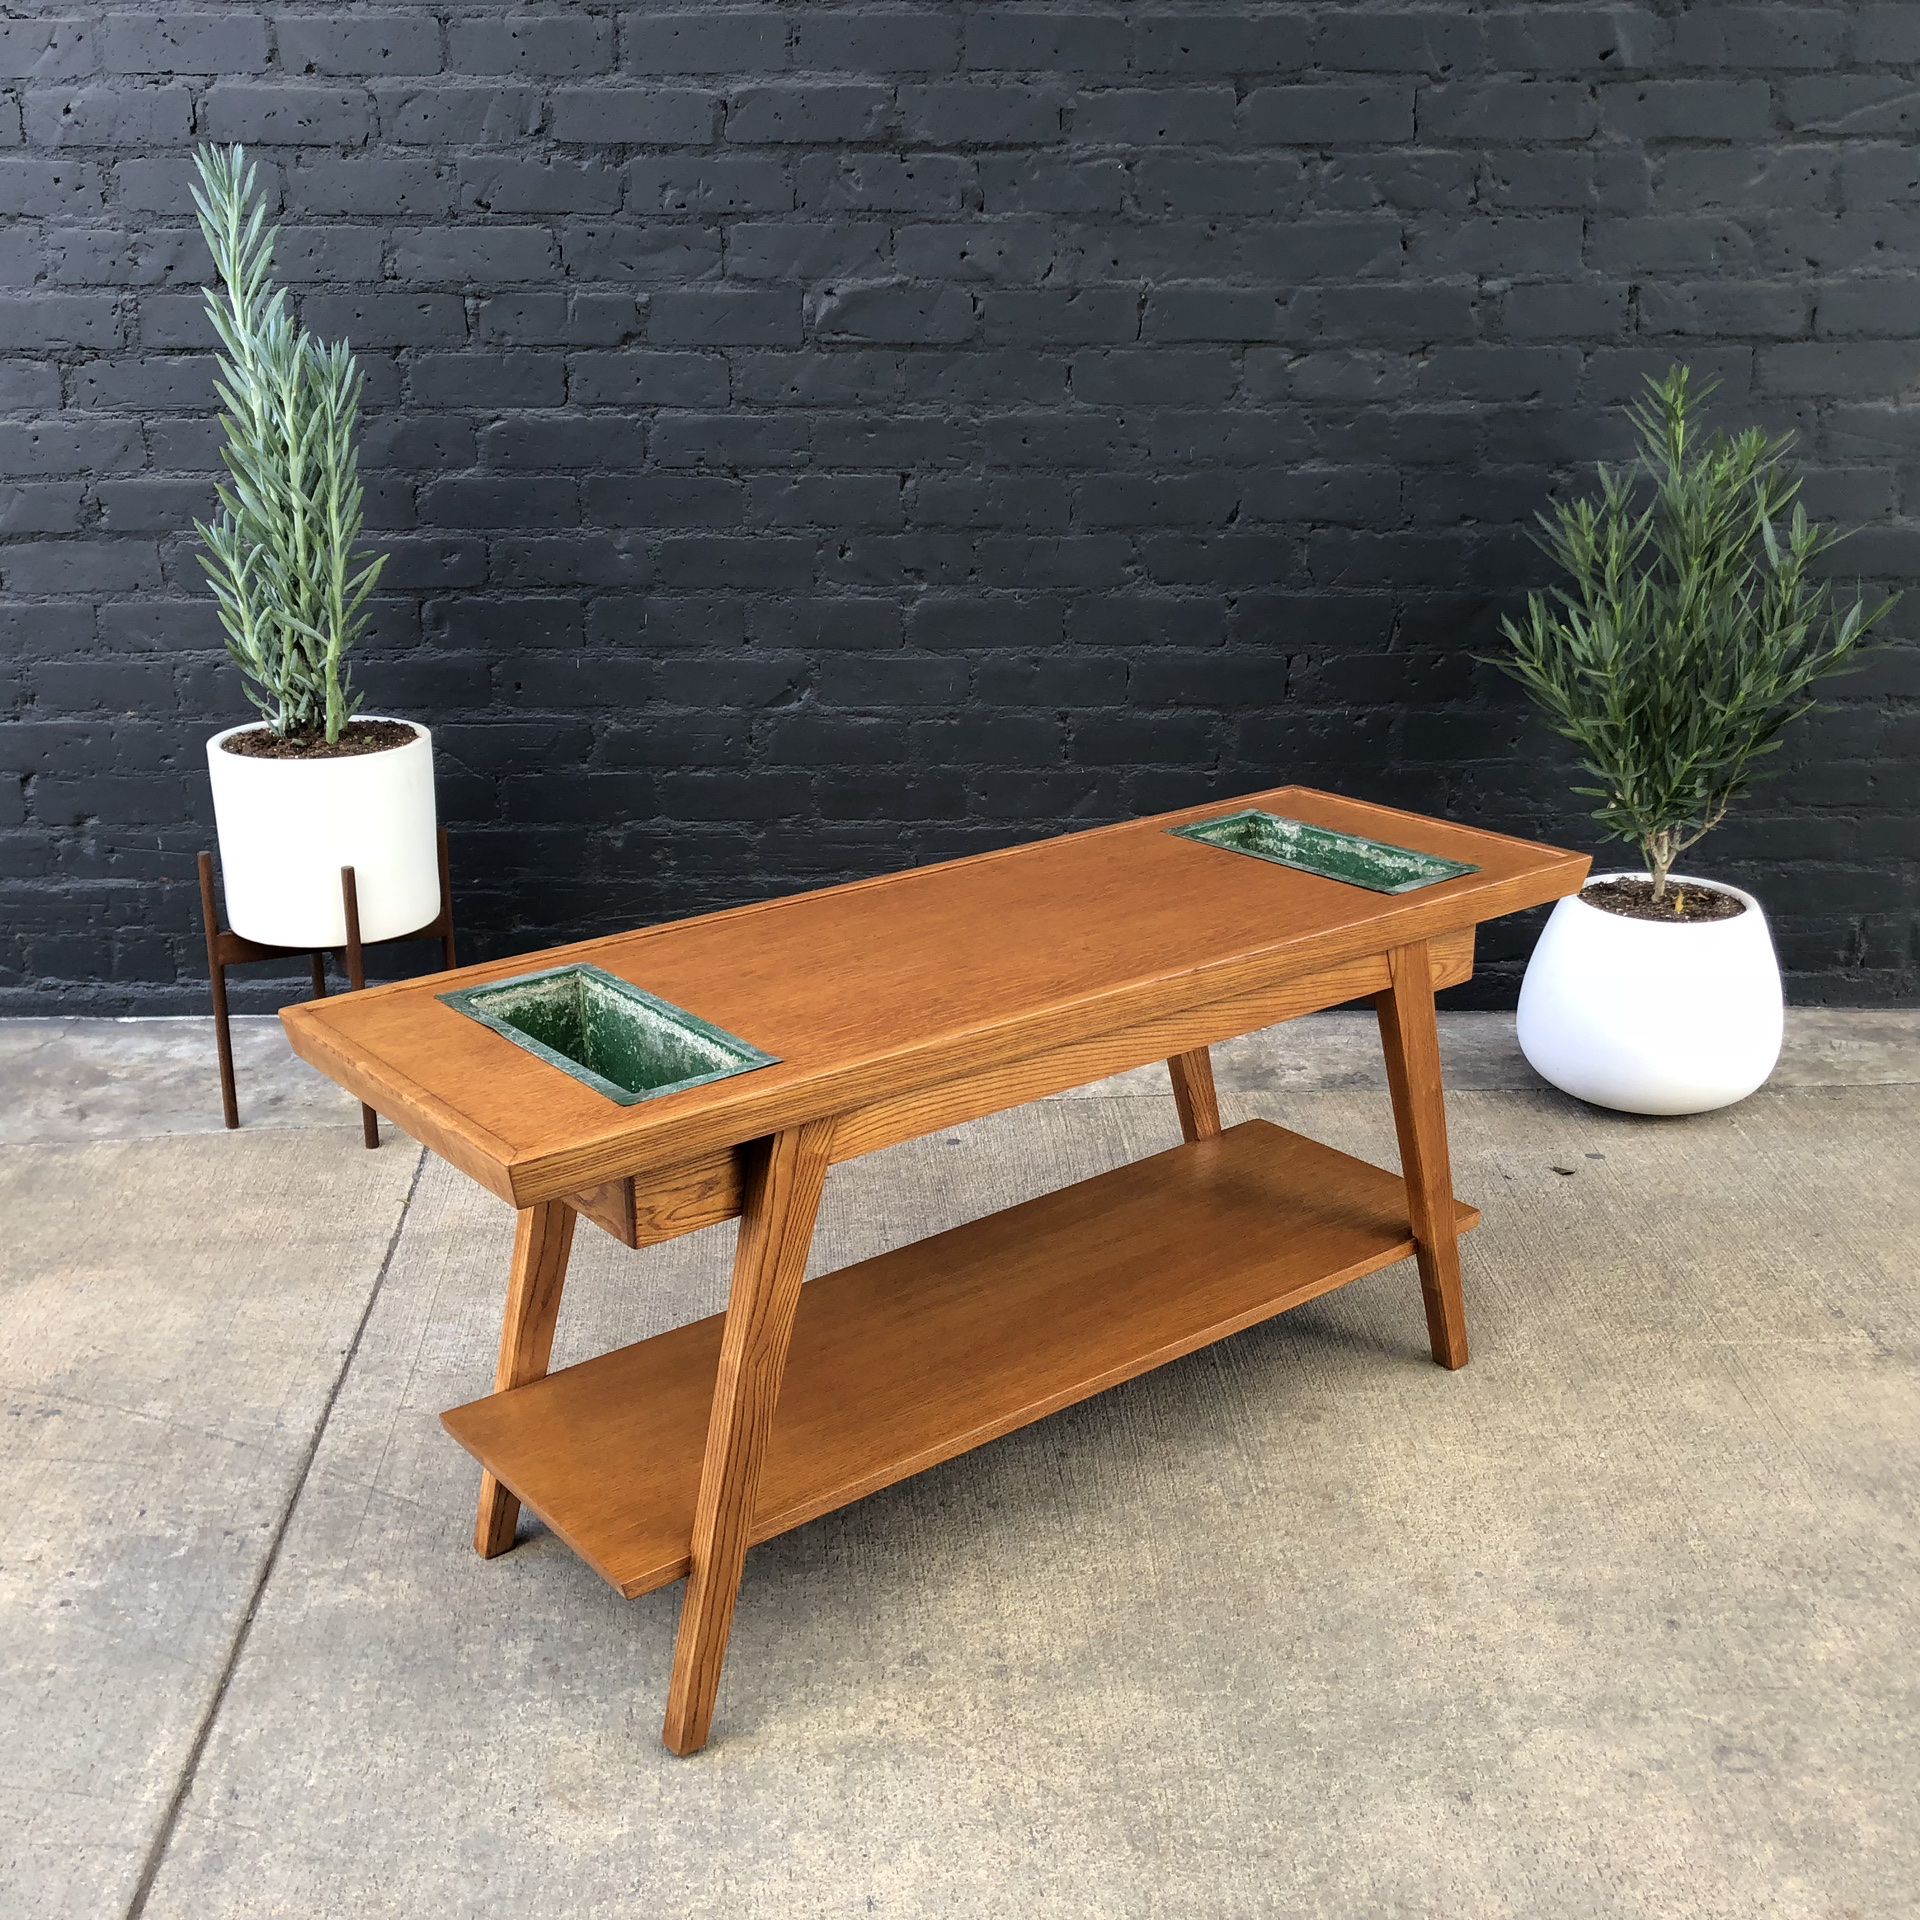 Mid-Century Modern Console Table with Integrated Planter Stands by Lane Furniture, c.1960's